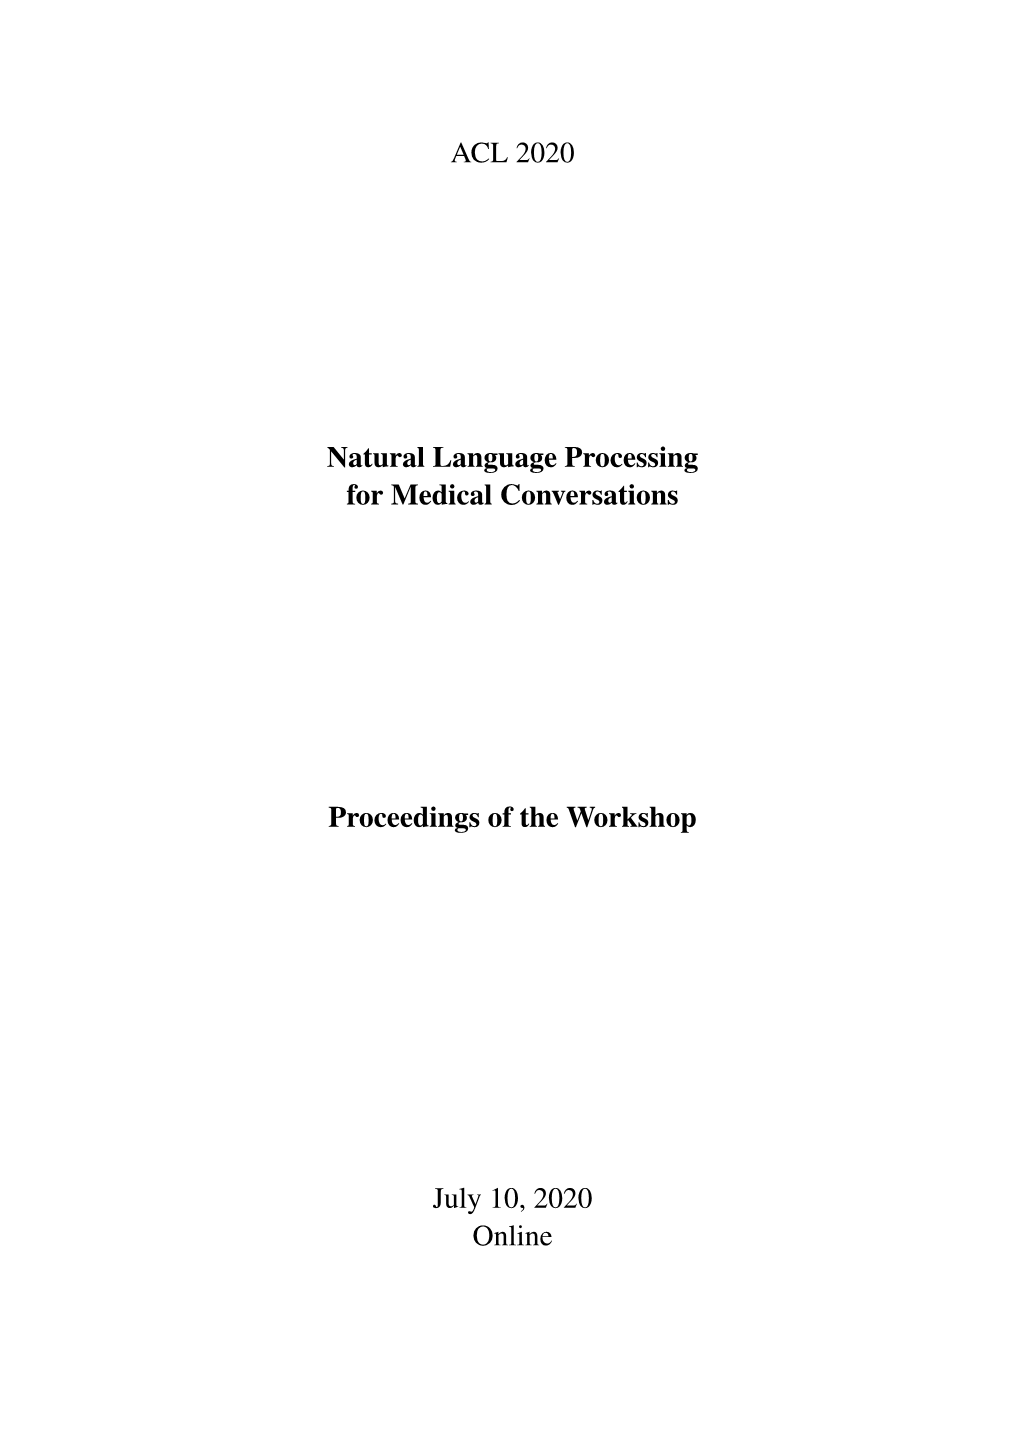 Proceedings of the 1St Workshop on NLP for Medical Conversations, Pages 1–6 Online, 10, 2020